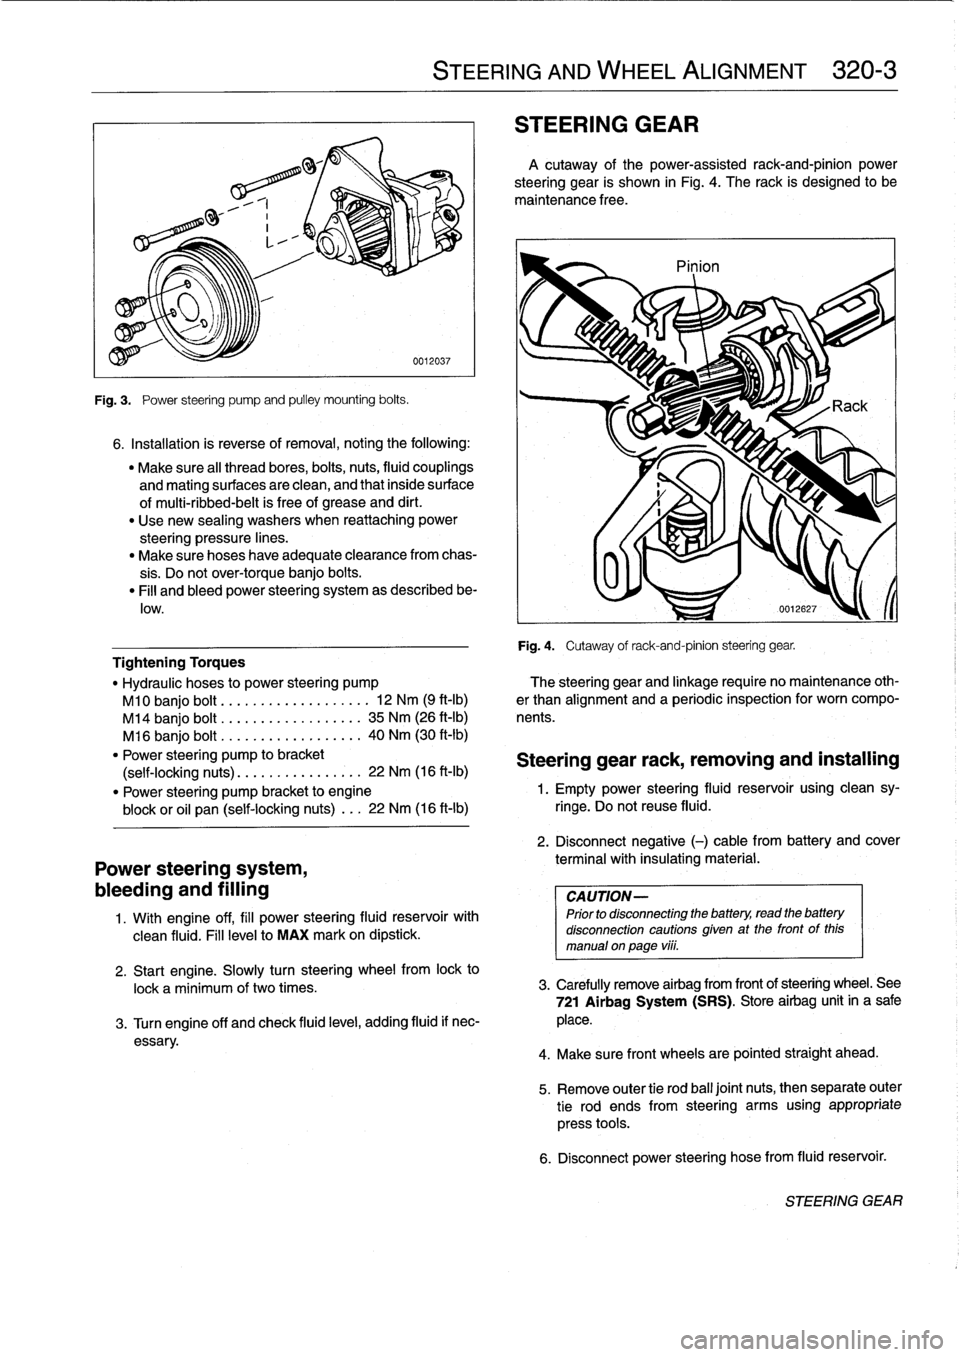 BMW M3 1995 E36 Owners Guide 
Fig
.
3
.

	

Power
steering
pump
and
pulley
mounting
bolts
.

6
.
Installation
is
reverse
of
removal,
noting
the
following
:

"
Make
sure
al¡
thread
bores,
bolts,
nuts,
fluid
couplings

and
mating
